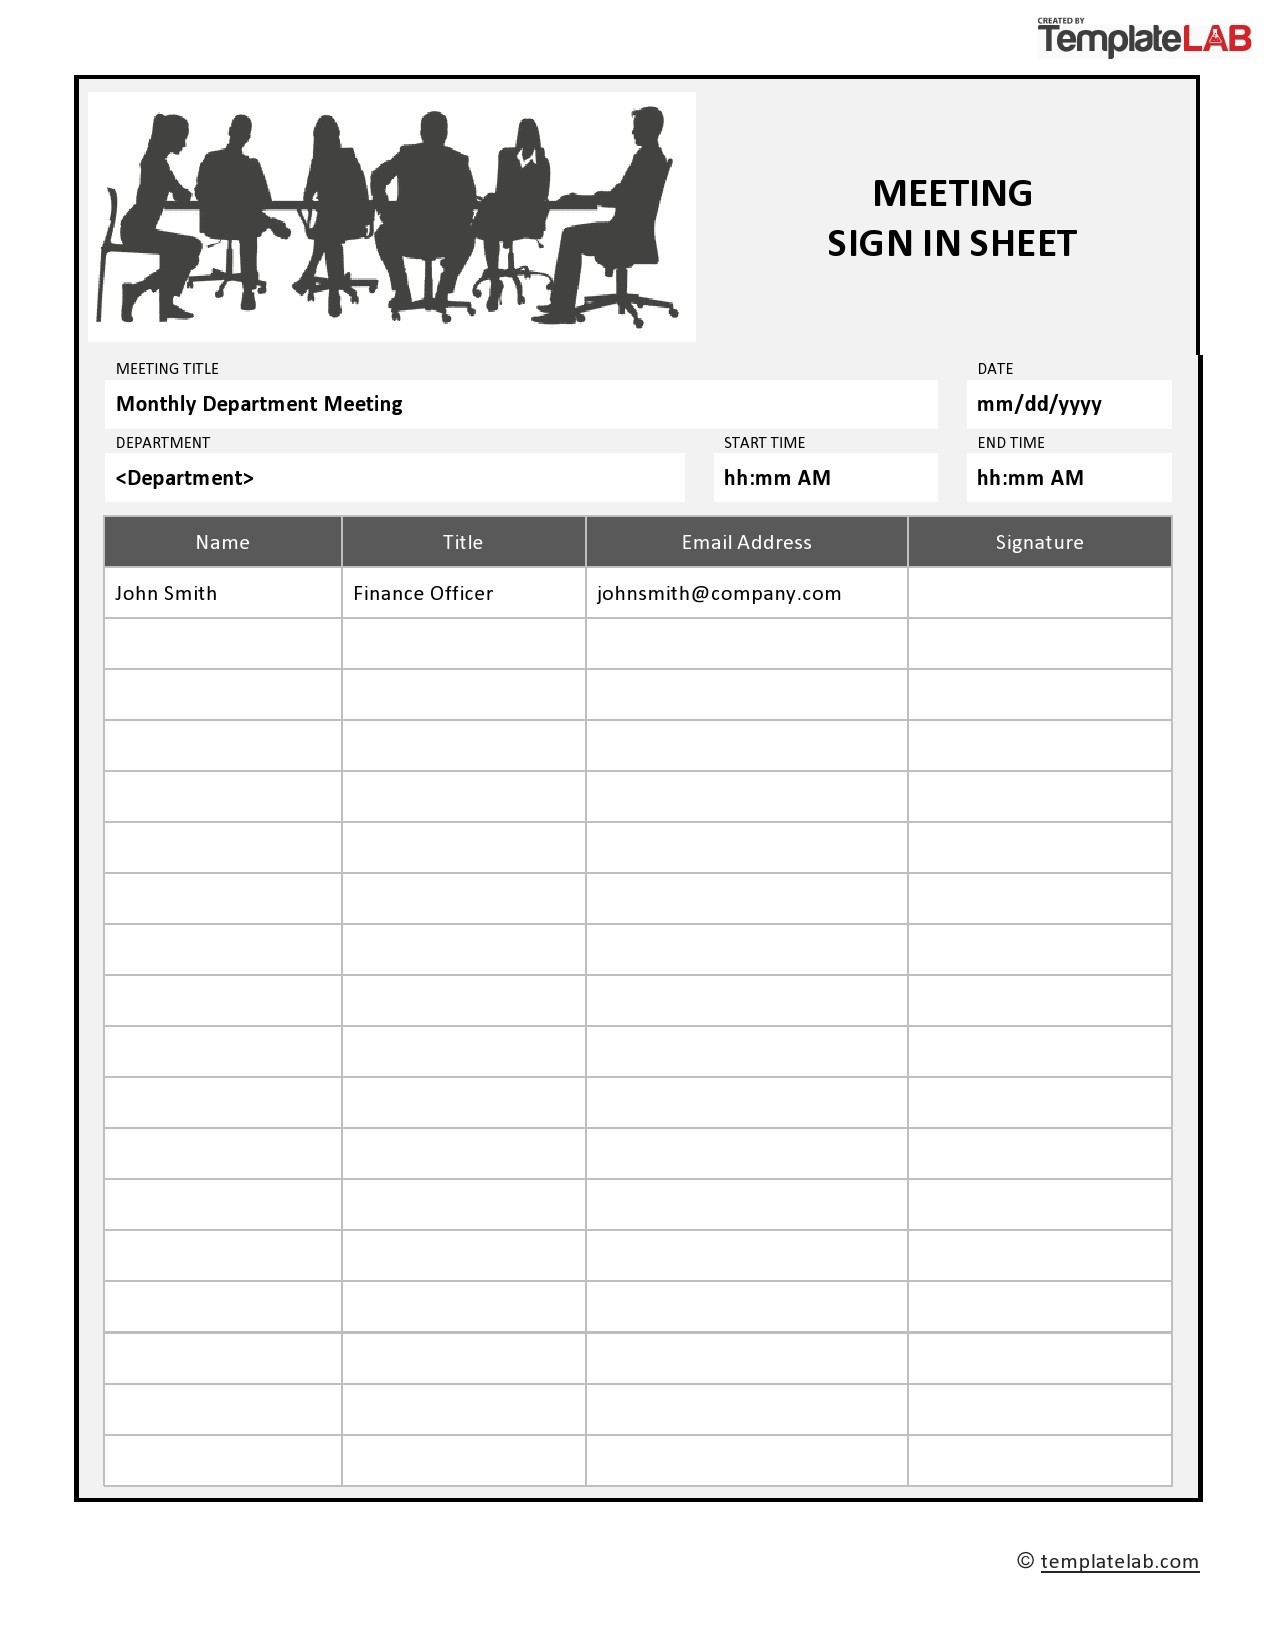 40 Sign Up Sheet / Sign In Sheet Templates (Word Excel)